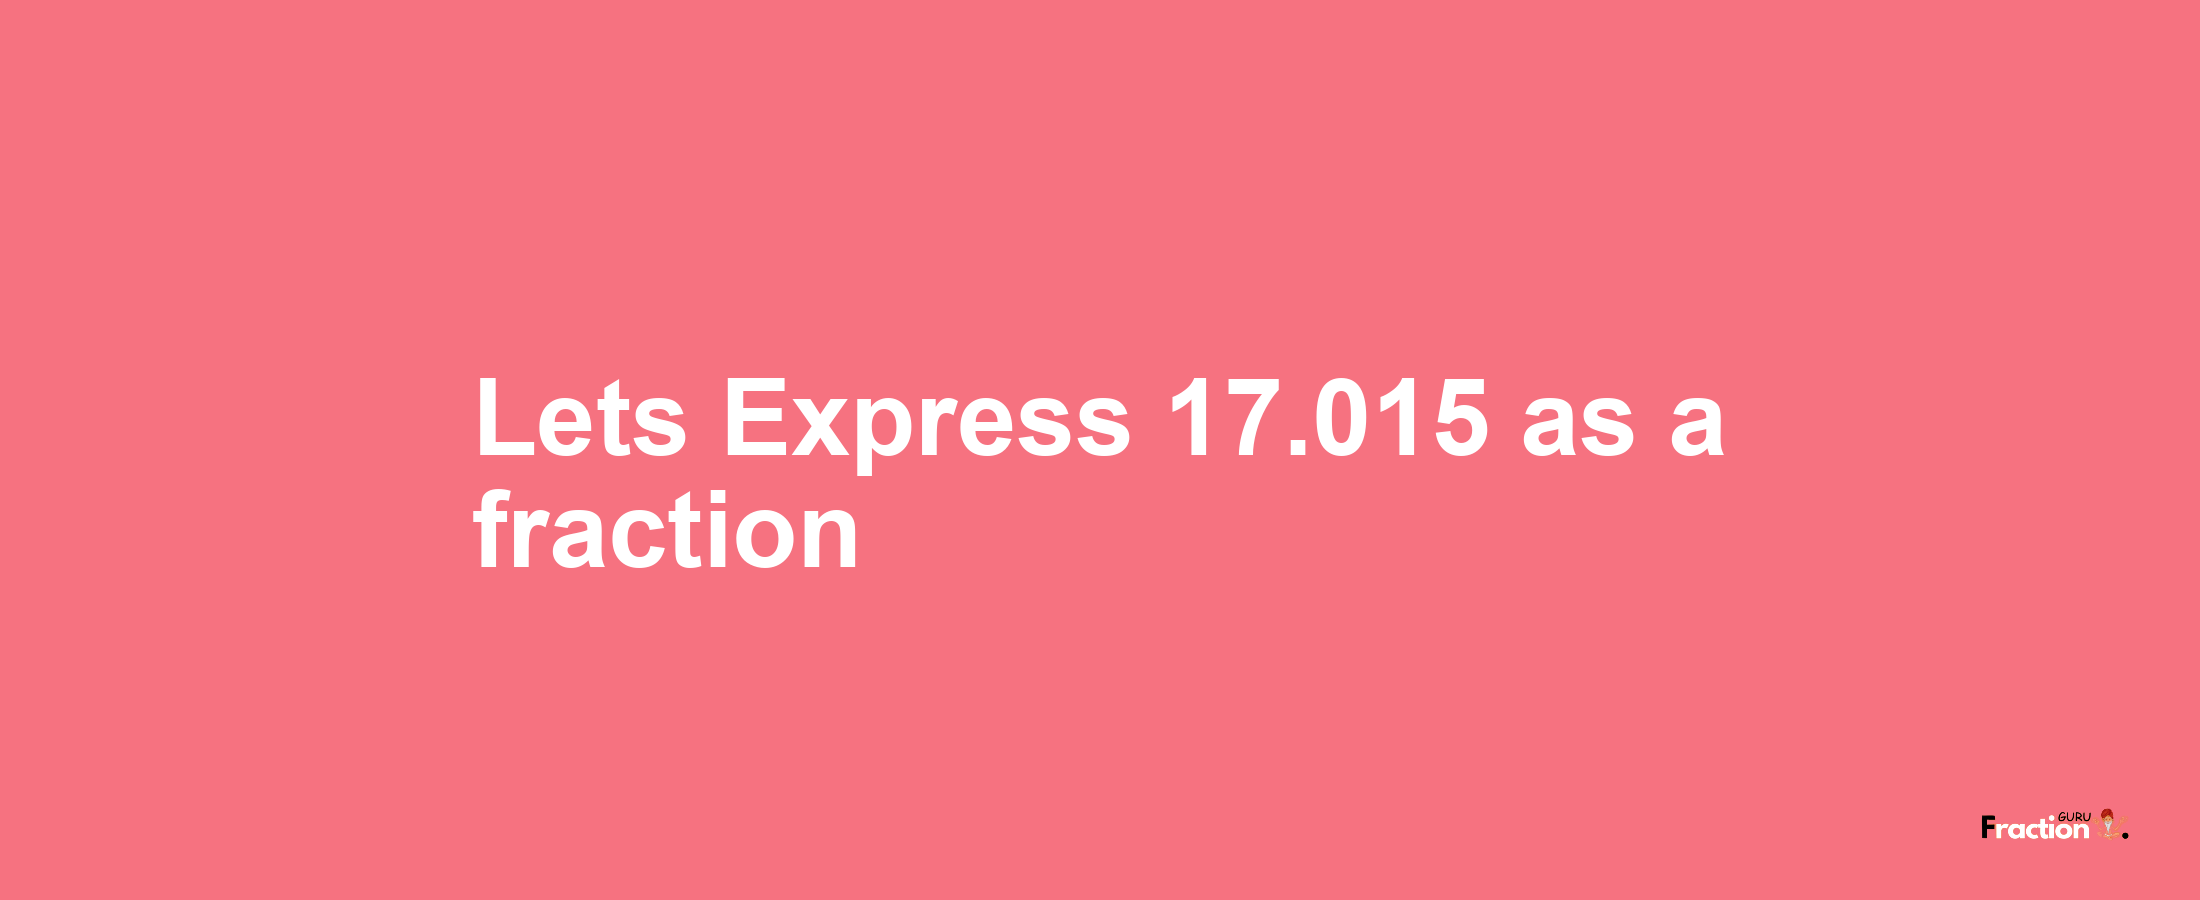 Lets Express 17.015 as afraction